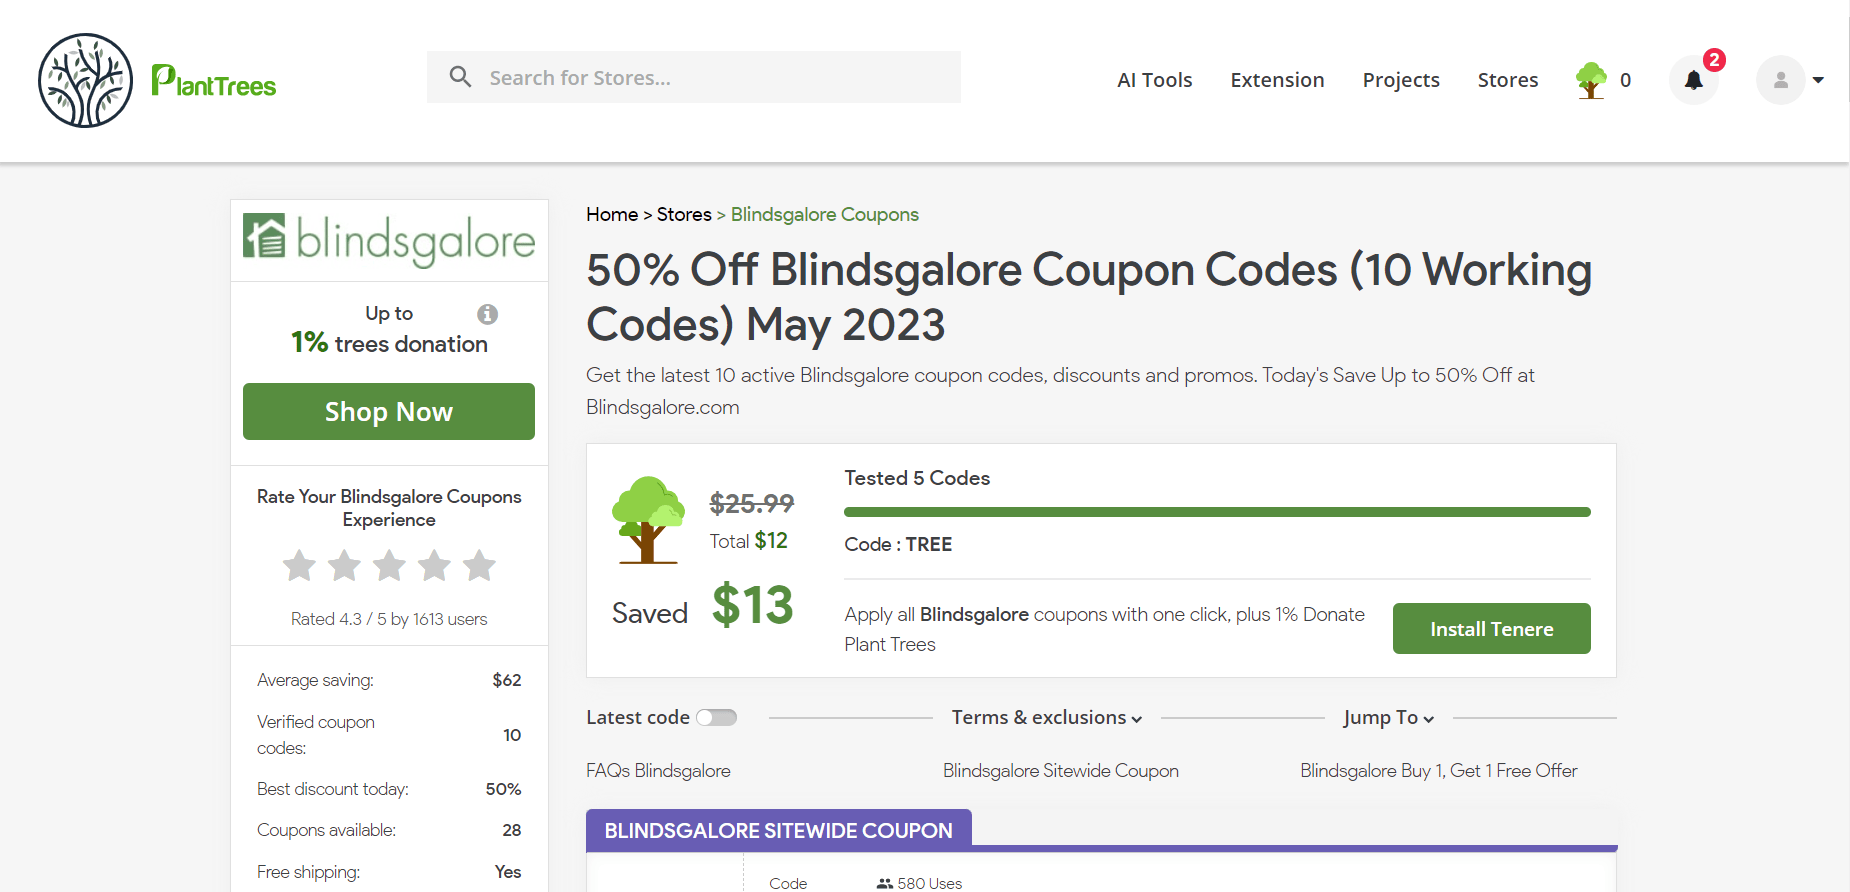 How To Use Blindsgalore Coupon 2